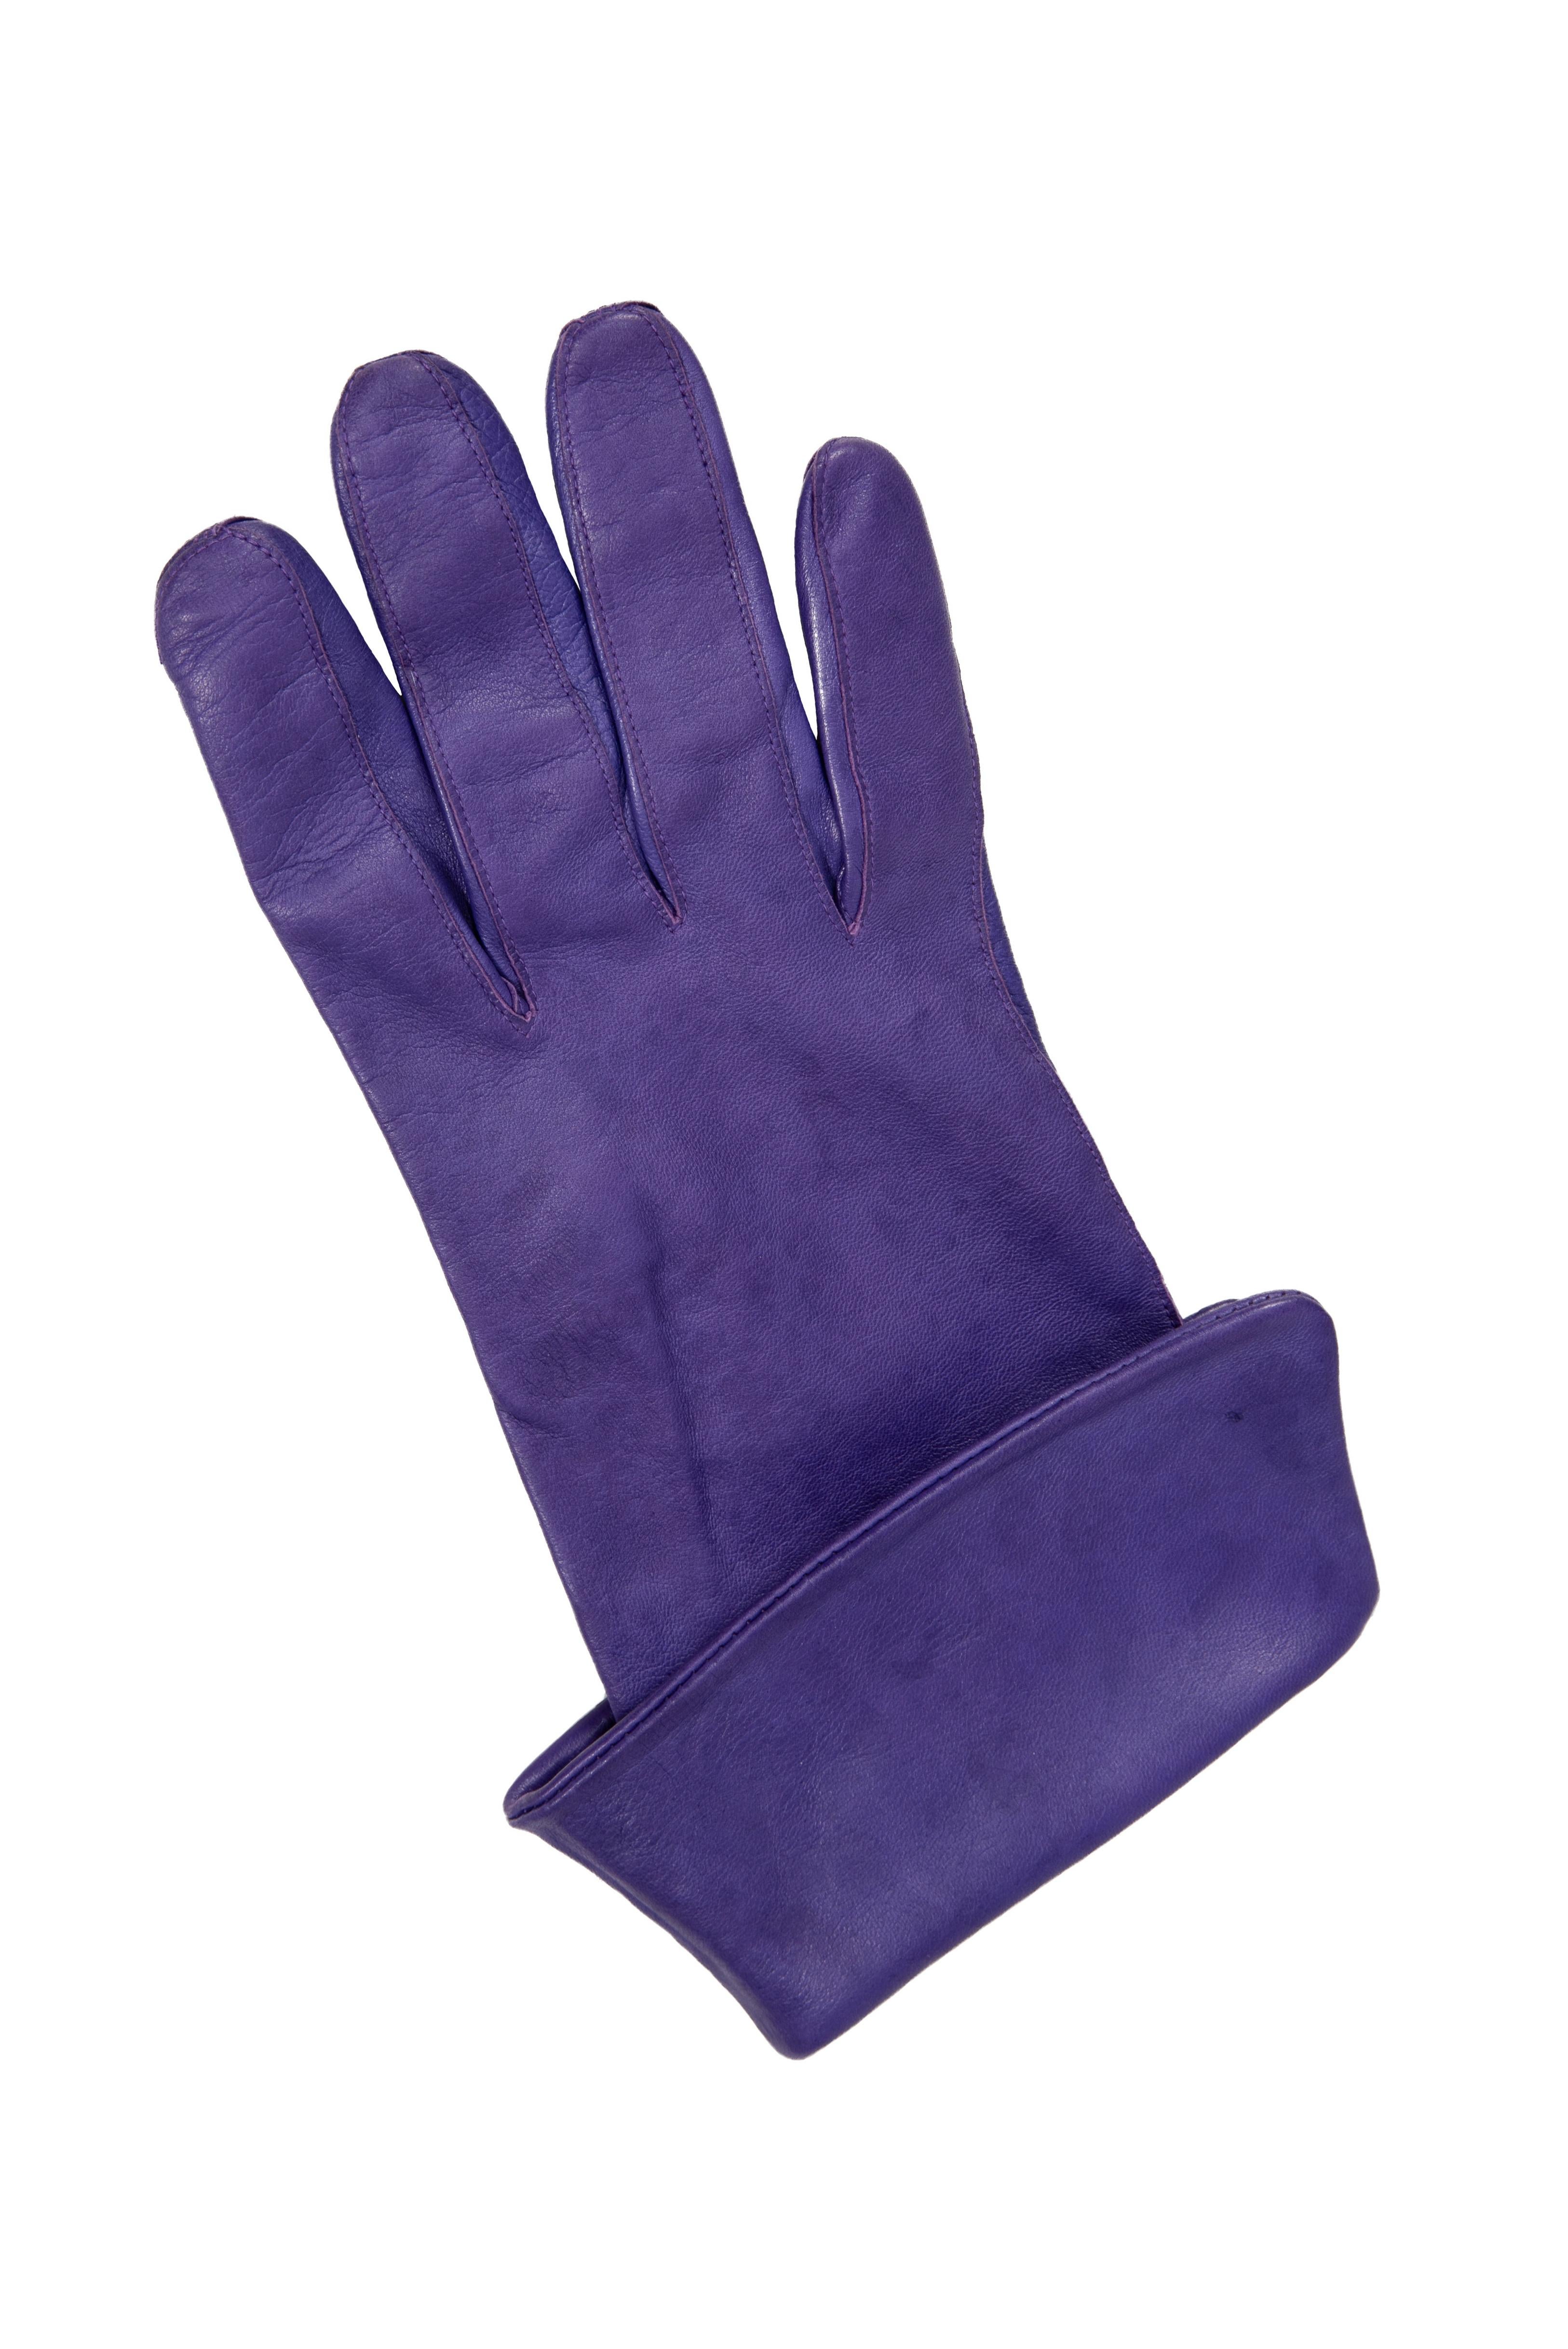 Roeckl Munich Purple Nappa Leather Gauntlet-Style Gloves with Flared Cuffs For Sale 2